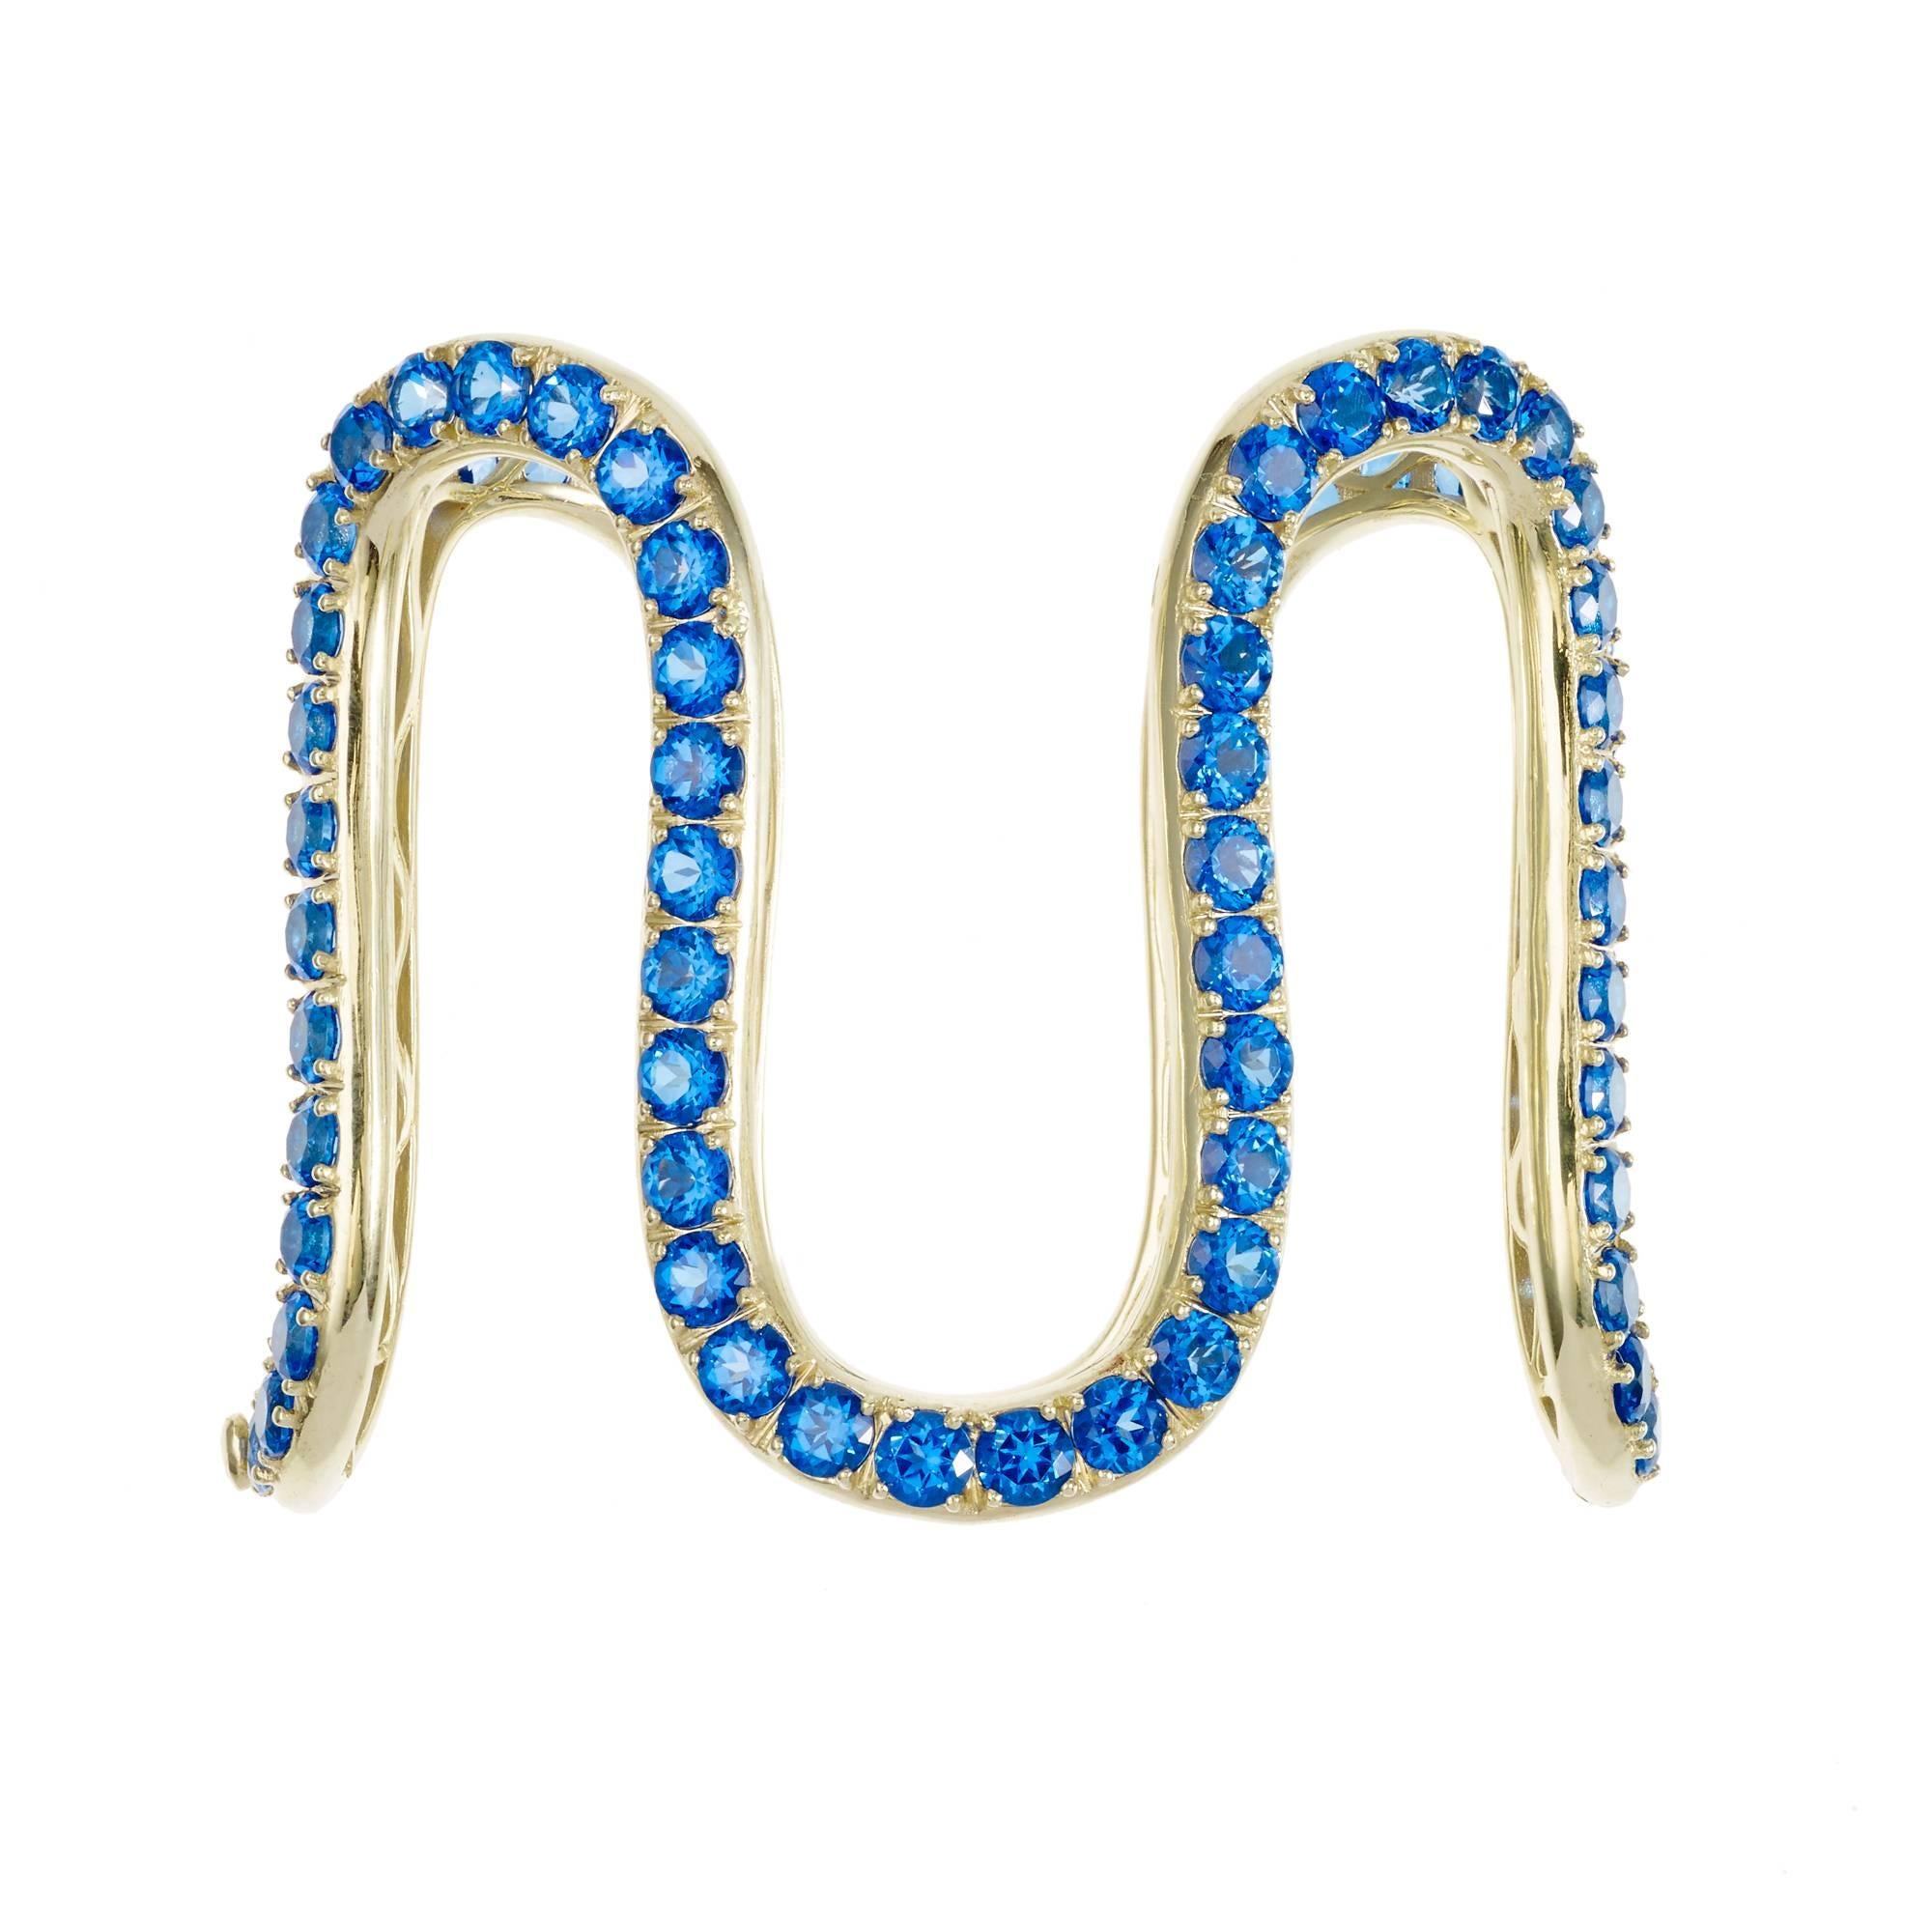 *MADE TO ORDER - 5 WEEK LEAD TIME*

Sabine Getty Wiggly Cuff in 18k yellow gold set with blue topaz

Topaz: 29.58ct

Yellow, pink, green and blue. Four colours inspired by the Memphis Group, the kookiest of Made in Italy designers, for a